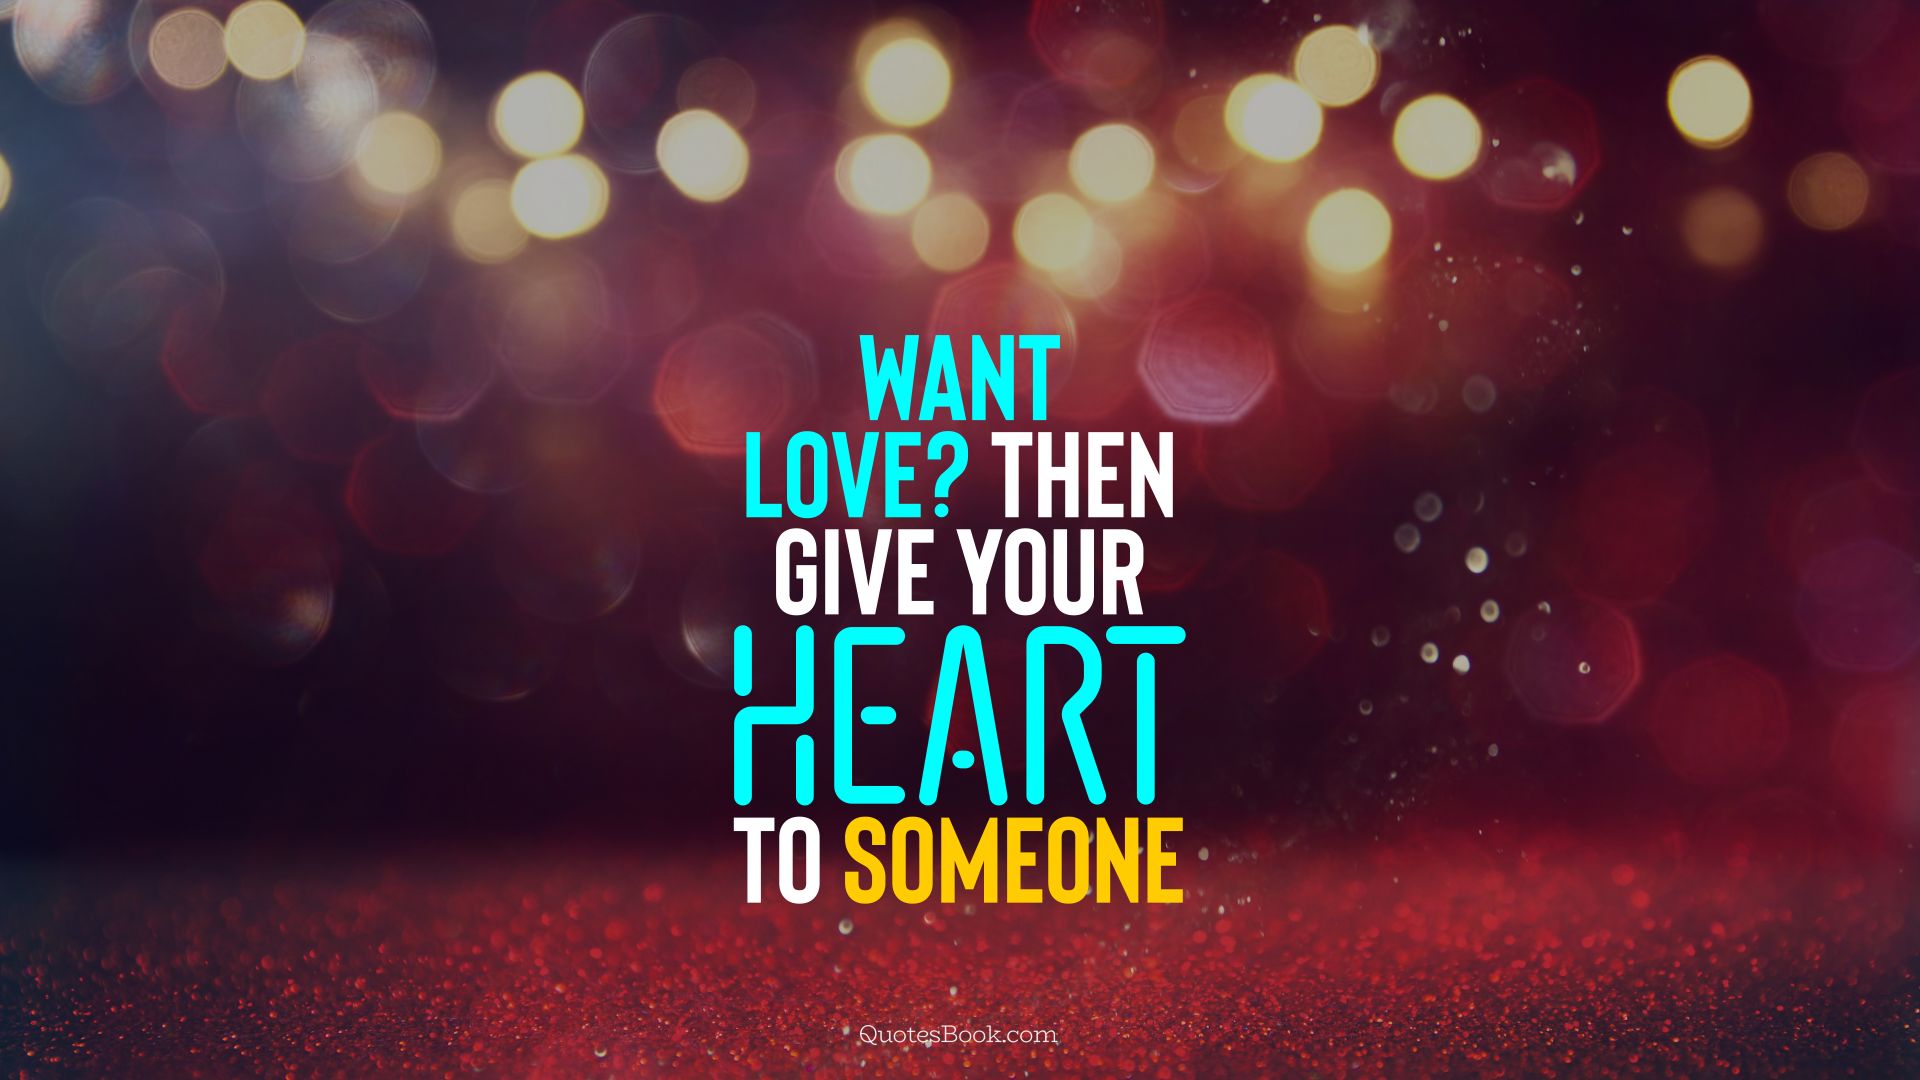 Want love? Then give your heart to someone. - Quote by QuotesBook